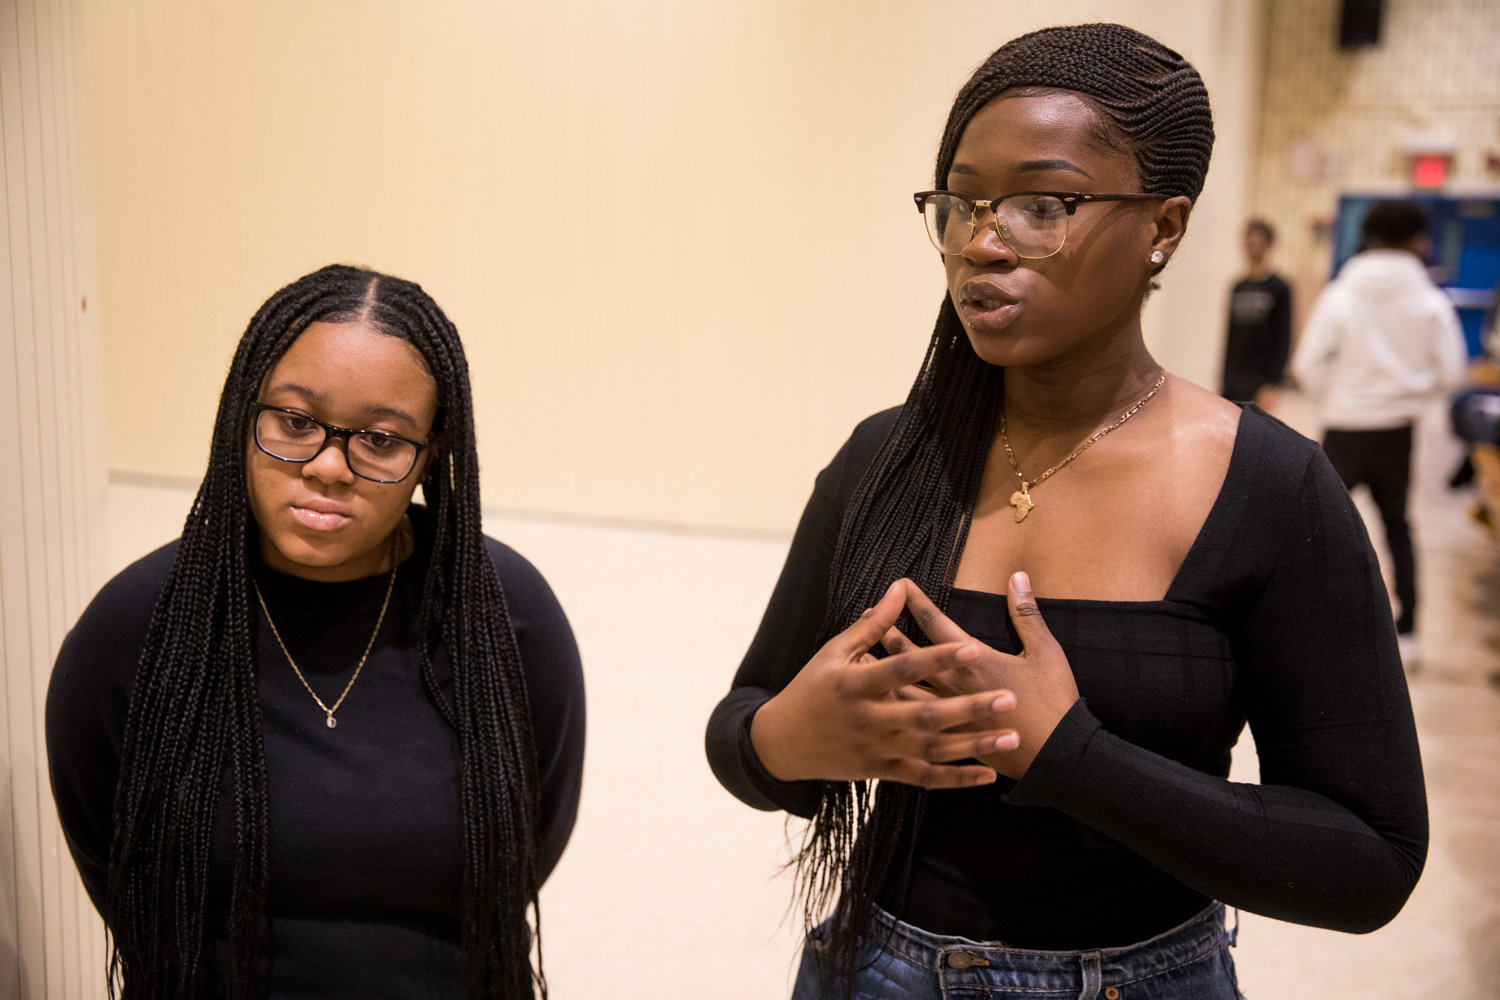 Marble Hill School for International Studies senior Massiata Cisso talks about her work in the school’s Black Student Union and what it was like putting this year’s Black History Show together. Cisso co-founded the Black Student Union with Tamara Wood, left.